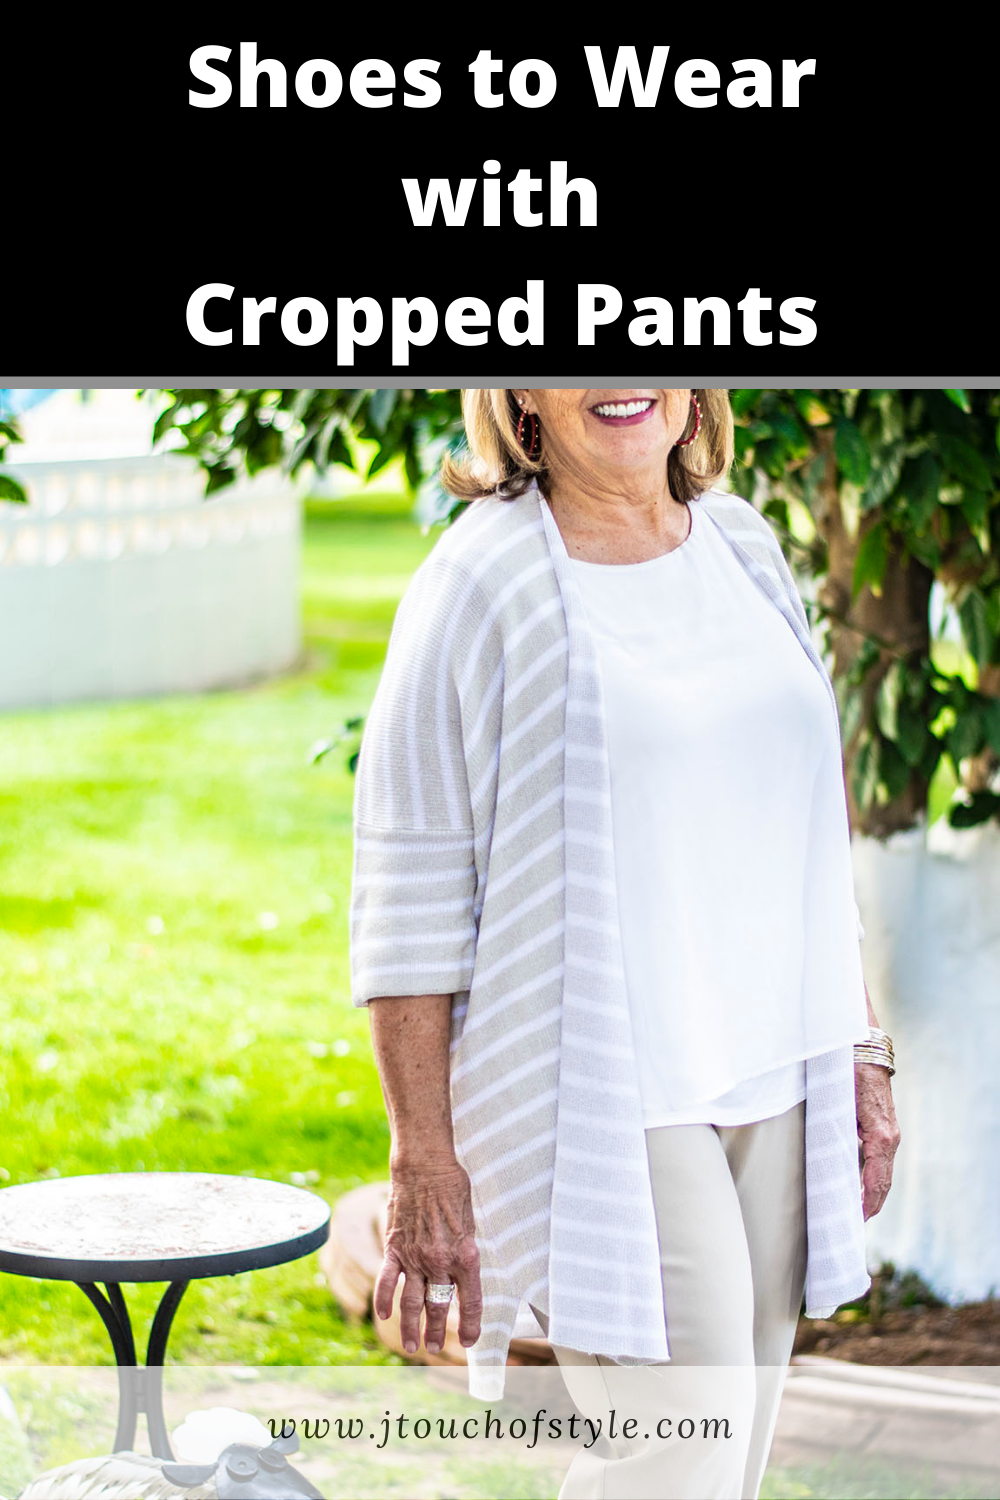 Descriptive and Valuable Kinds of Shoes to Wear with Cropped Pants